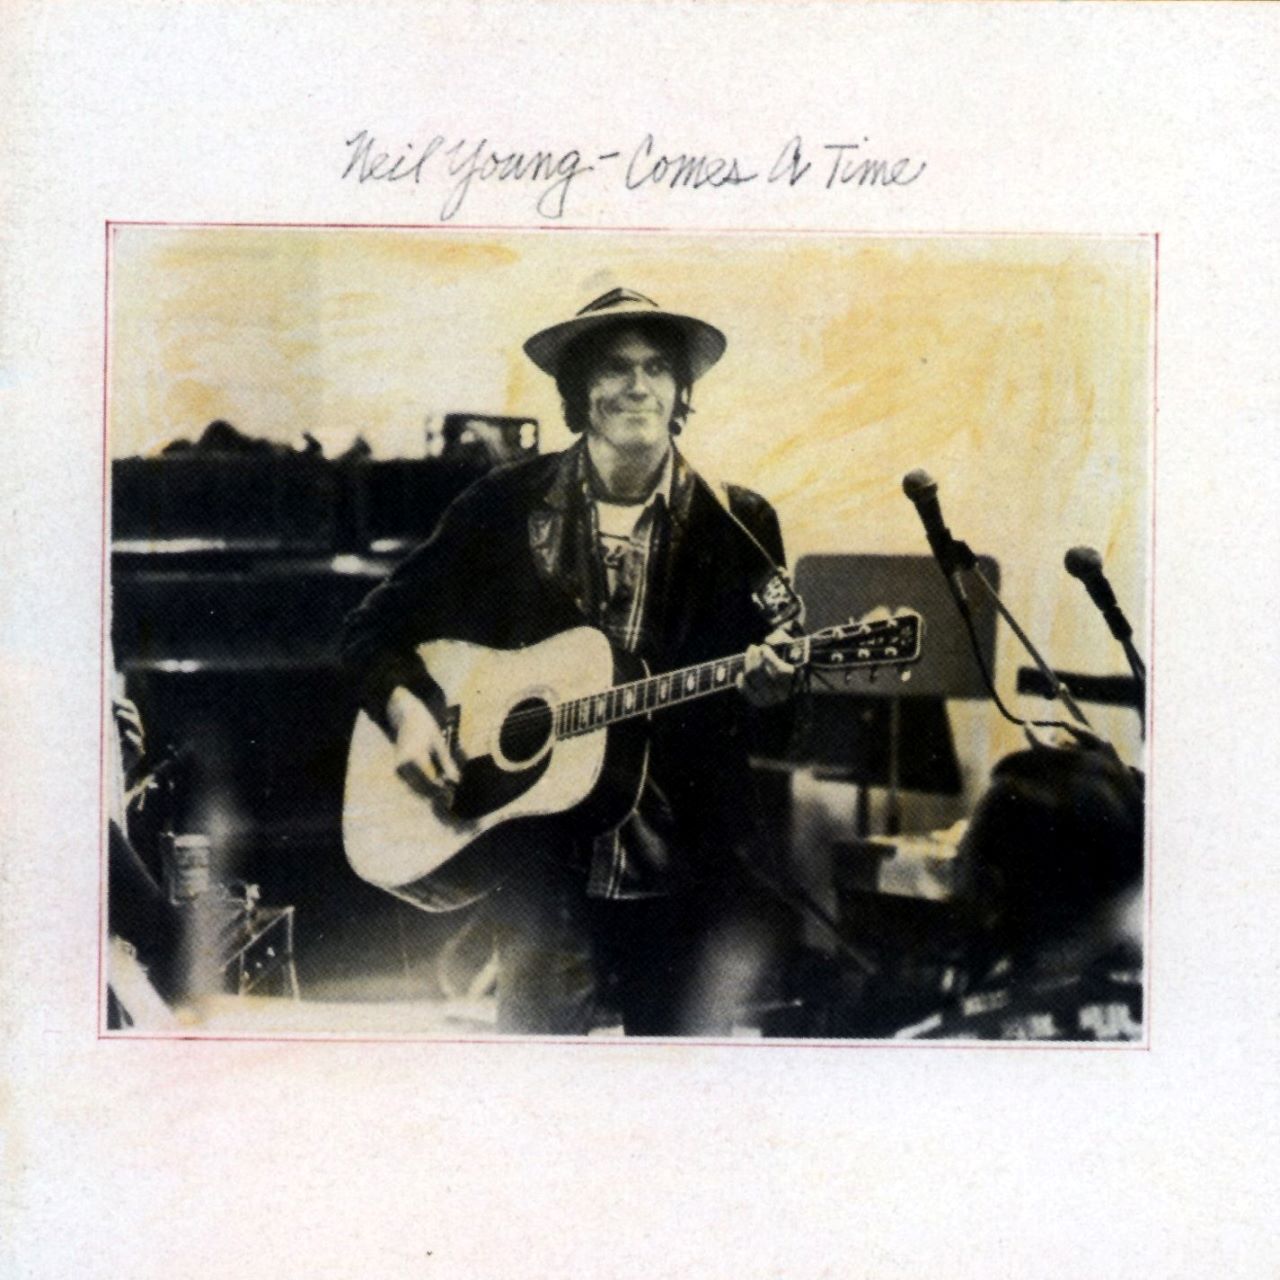 Neil Young - Comes A Time cover album